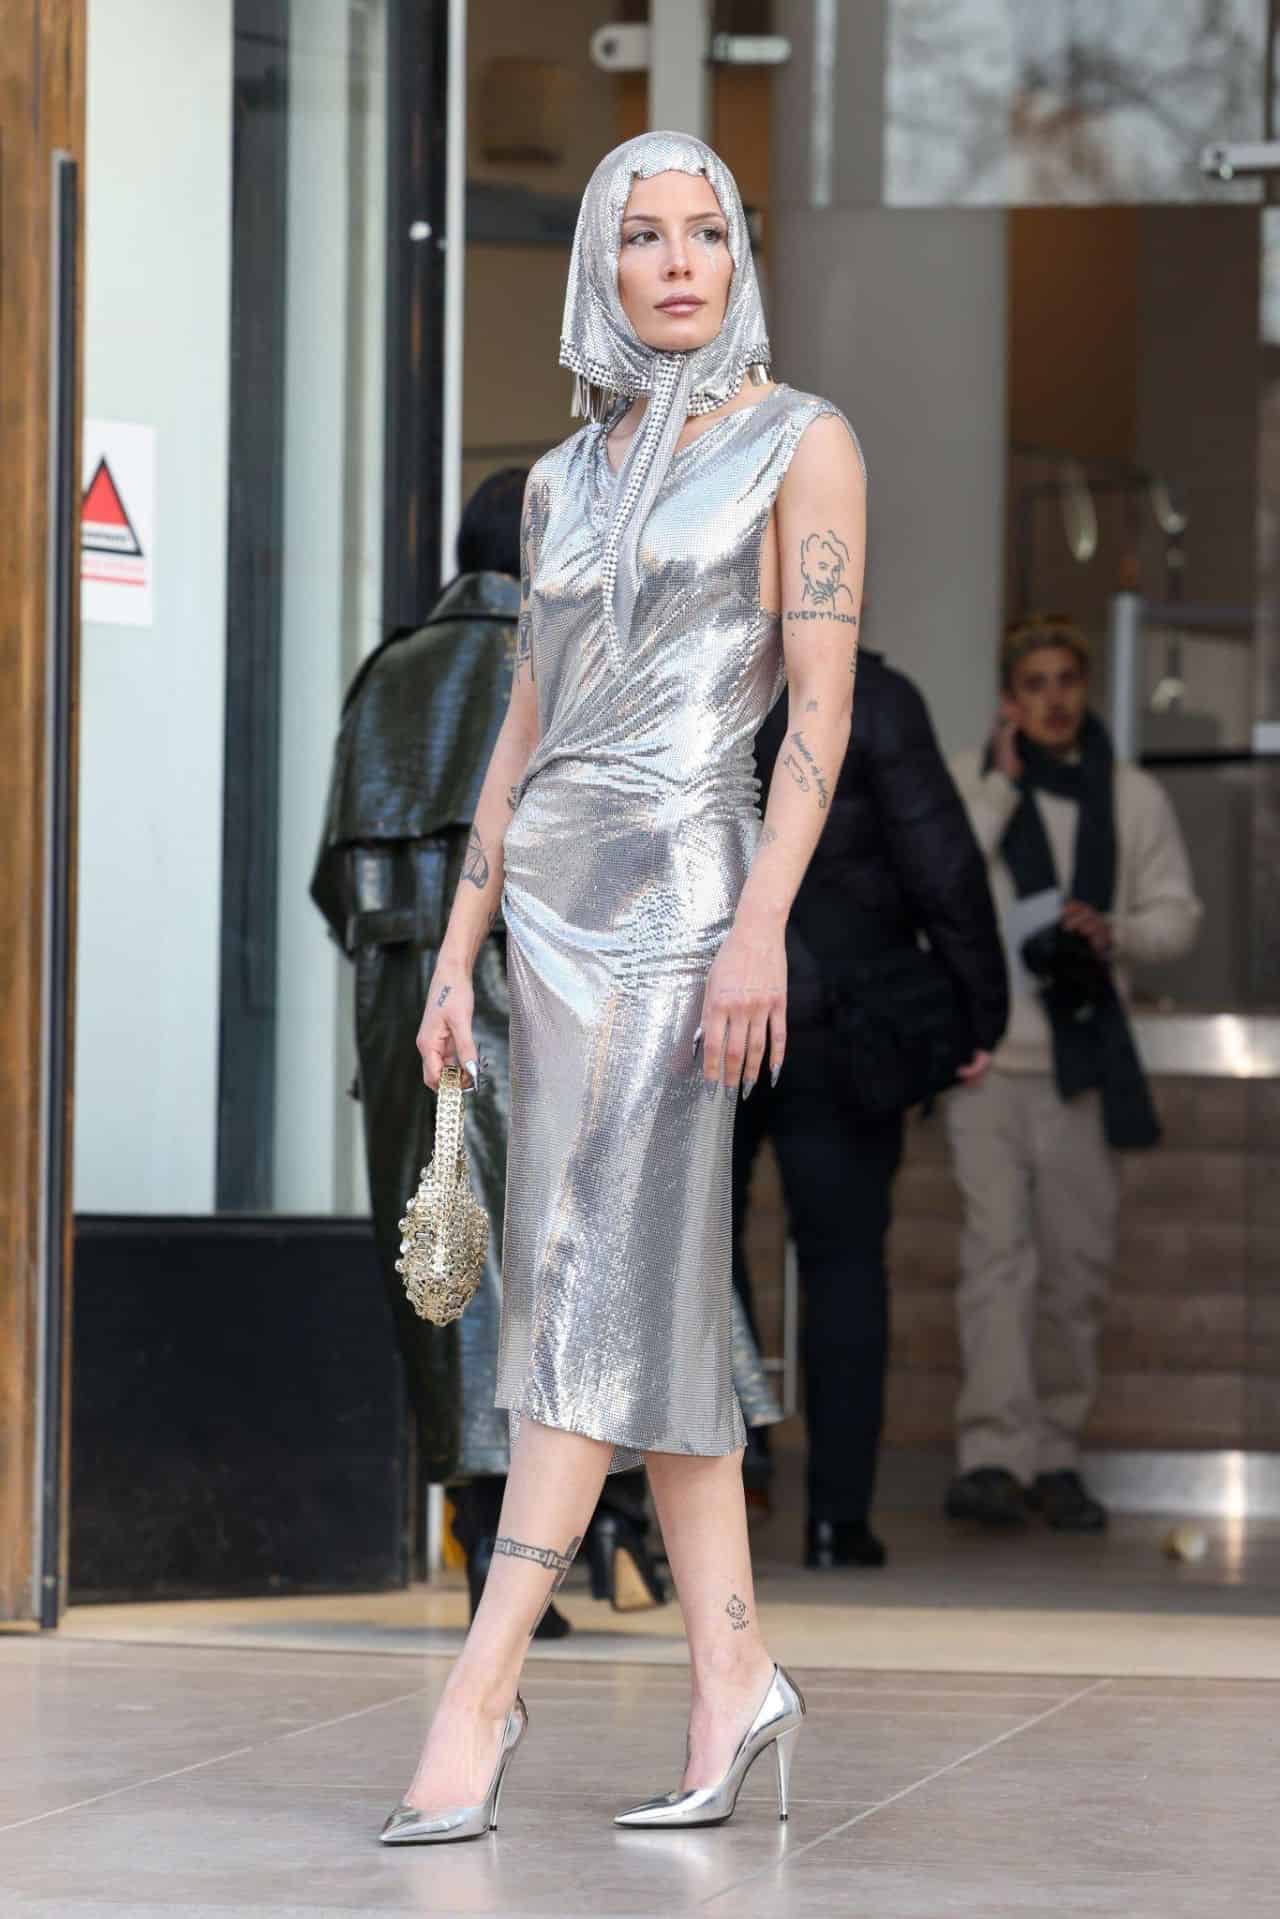 Halsey Attends Paco Rabanne's Fall 2023 Fashion Show in Paris